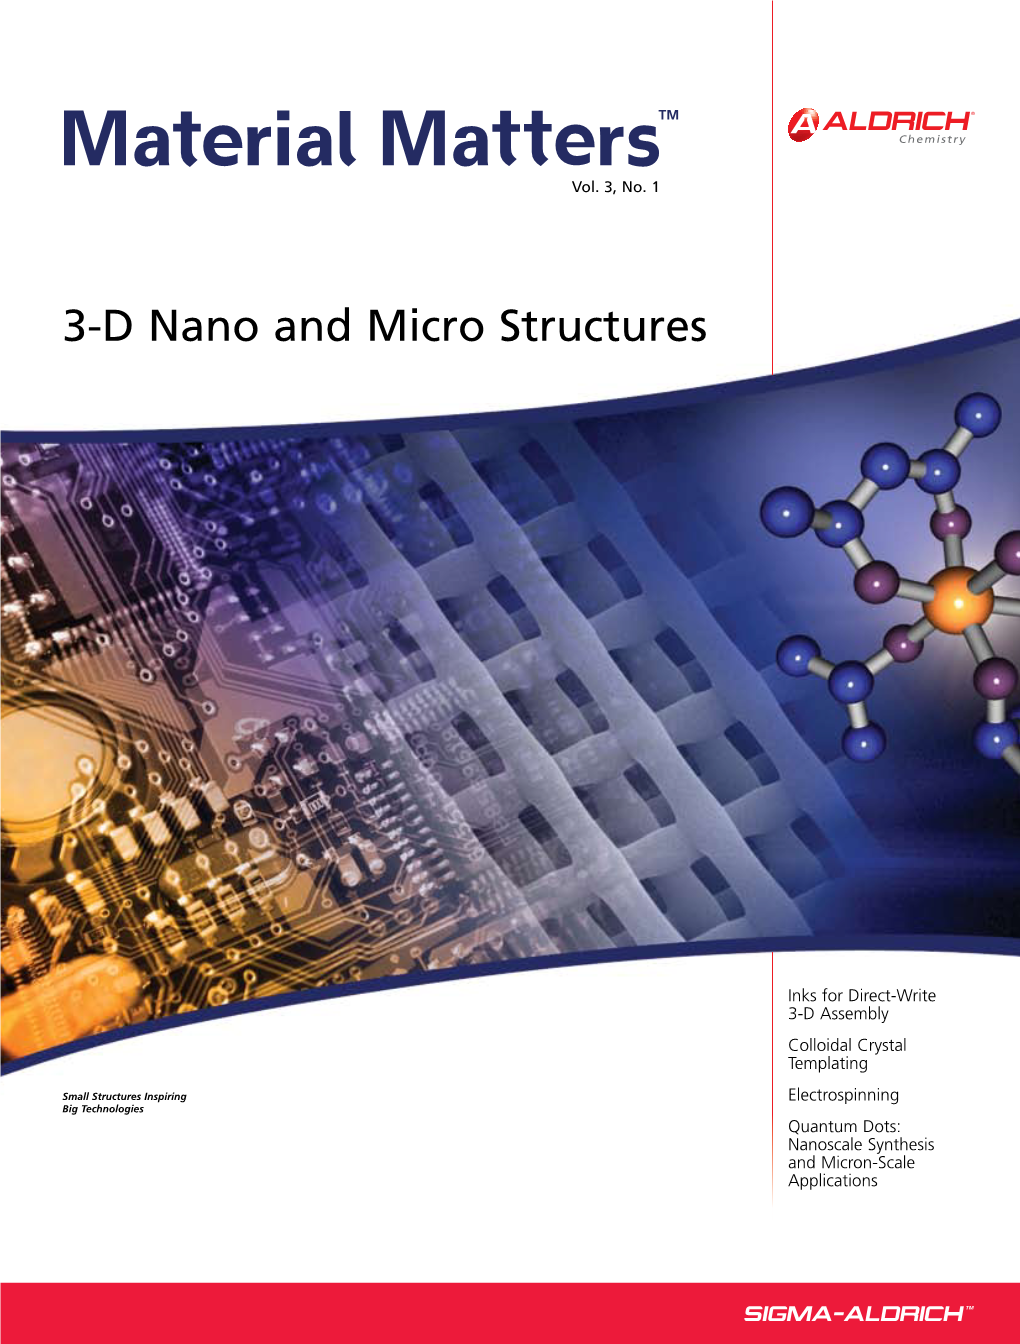 3-D Nano and Micro Structures